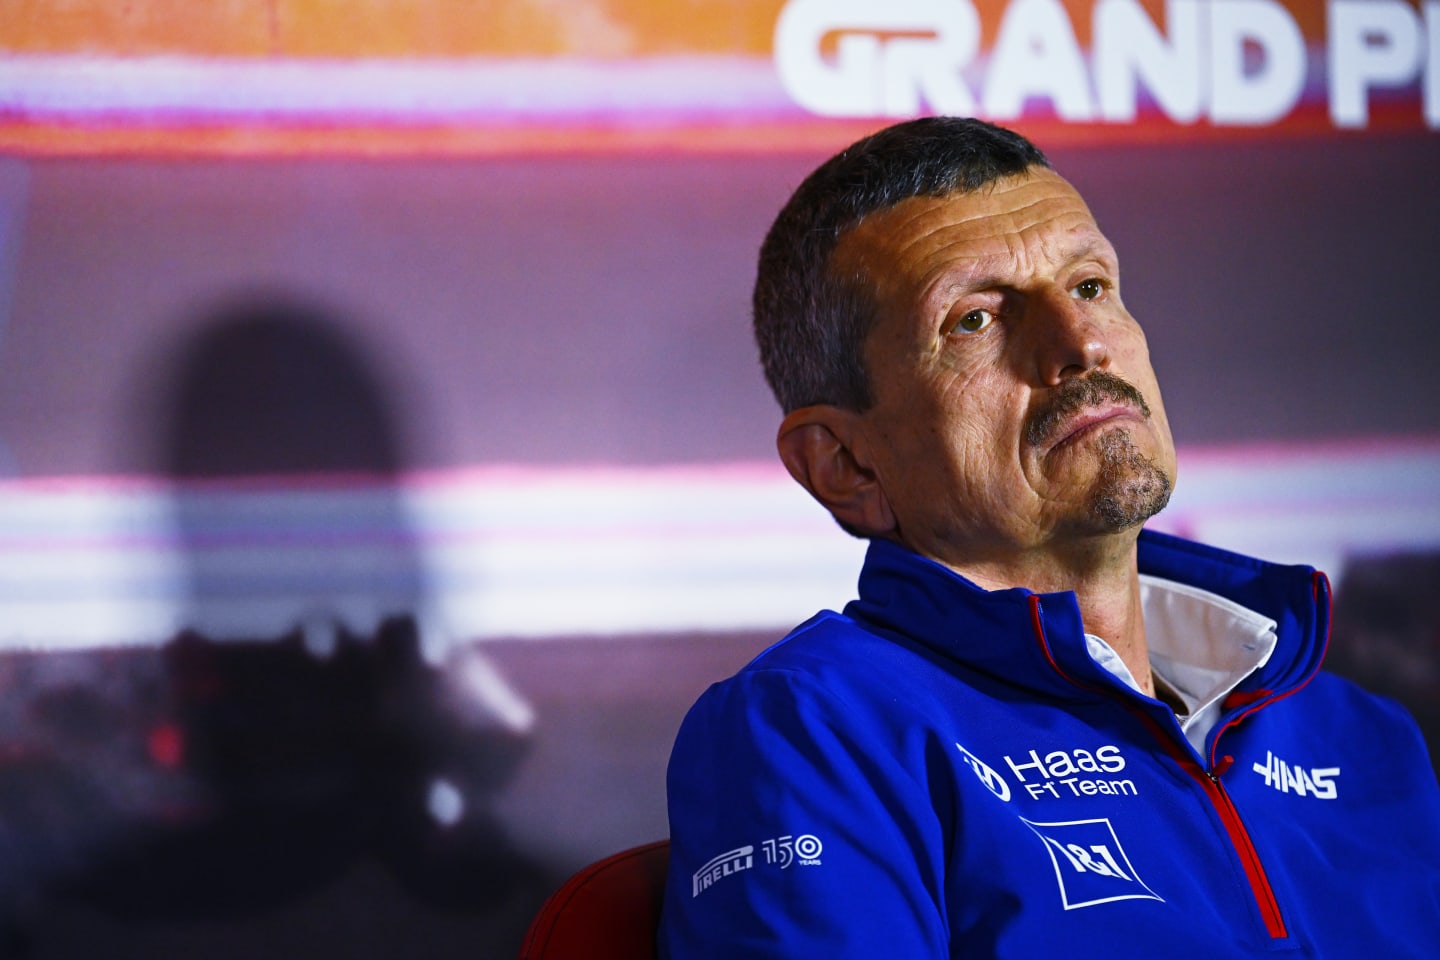 ZANDVOORT, NETHERLANDS - SEPTEMBER 03: Haas F1 Team Principal Guenther Steiner attends the Team Principals Press Conference prior to final practice ahead of the F1 Grand Prix of The Netherlands at Circuit Zandvoort on September 03, 2022 in Zandvoort, Netherlands. (Photo by Clive Mason/Getty Images)